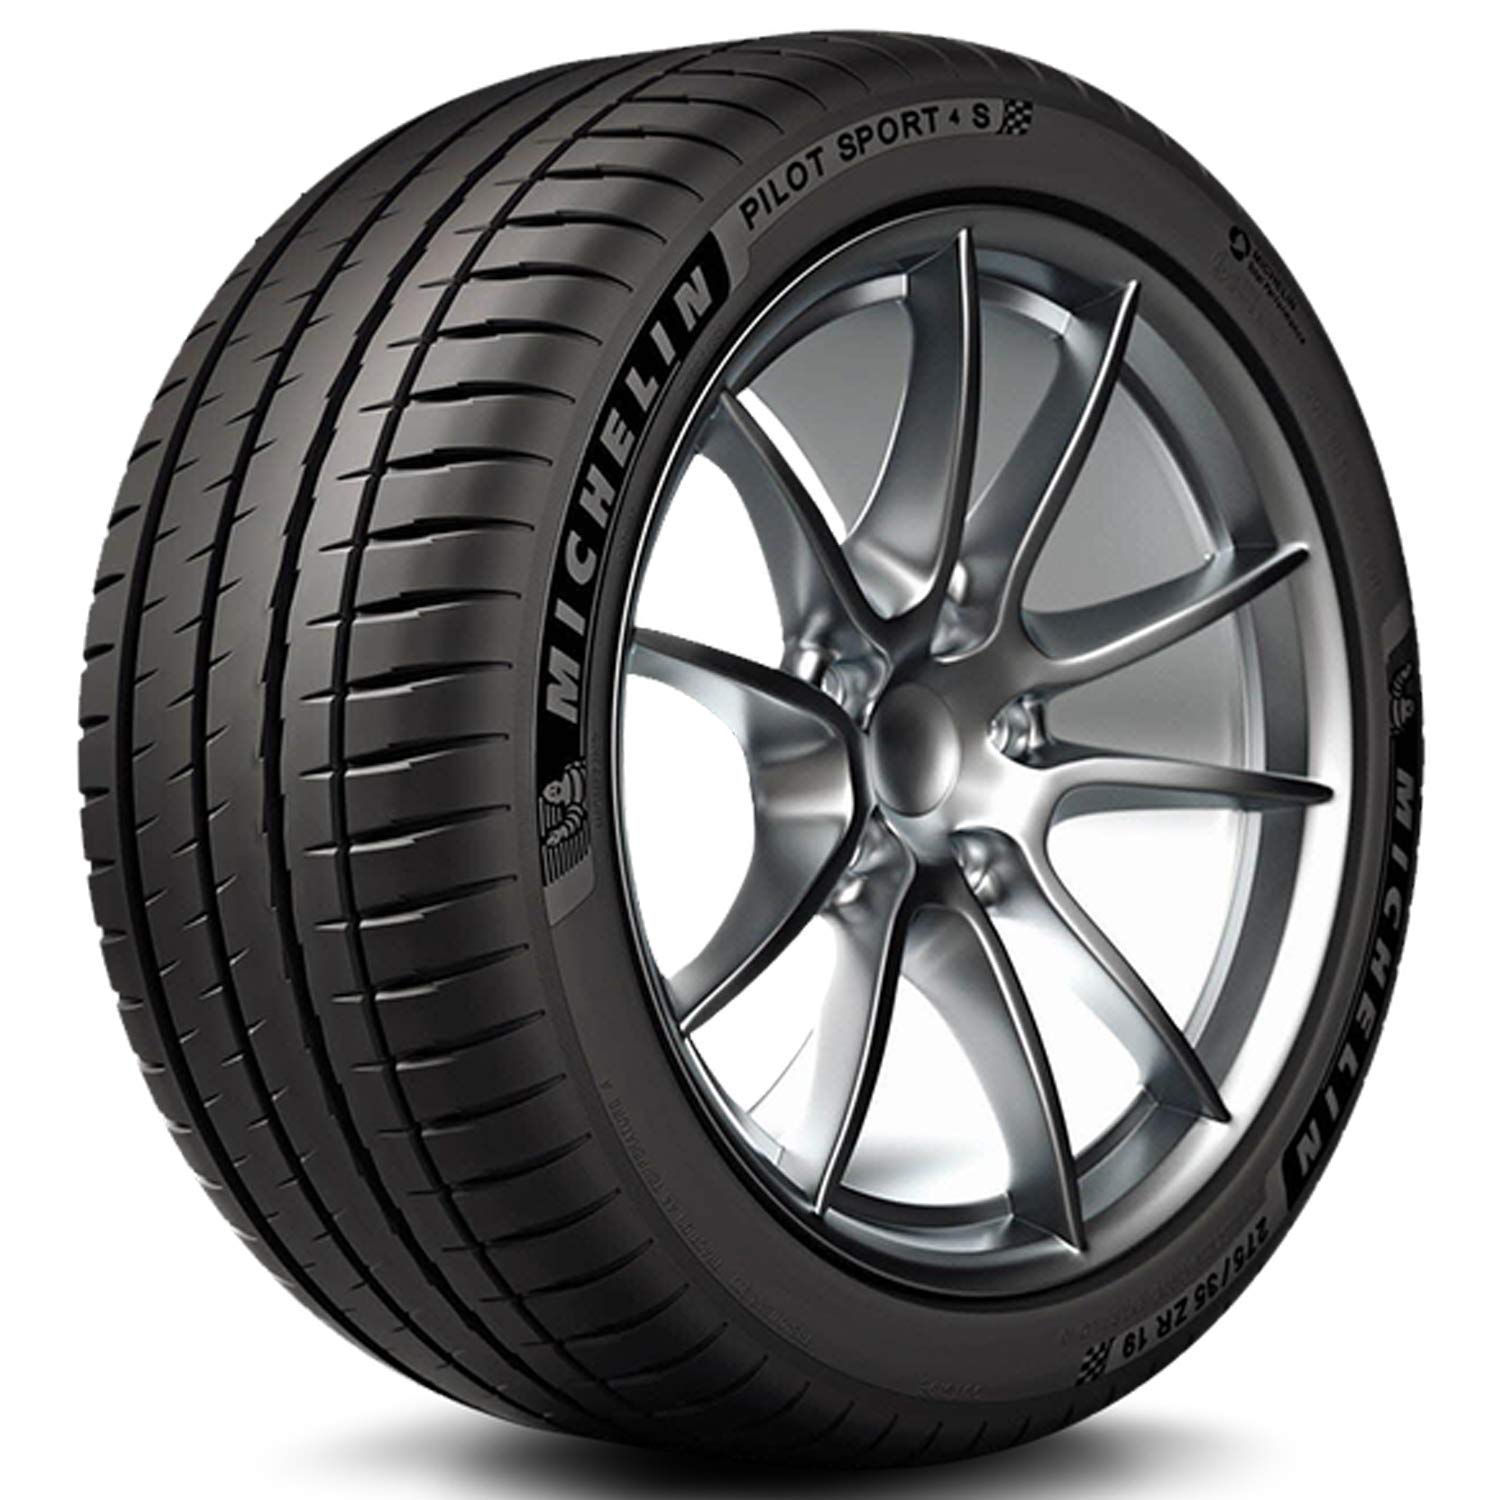 Anvelope auto MICHELIN PS 4 S ZP TPC XL RFT 255/30 R19 91Y